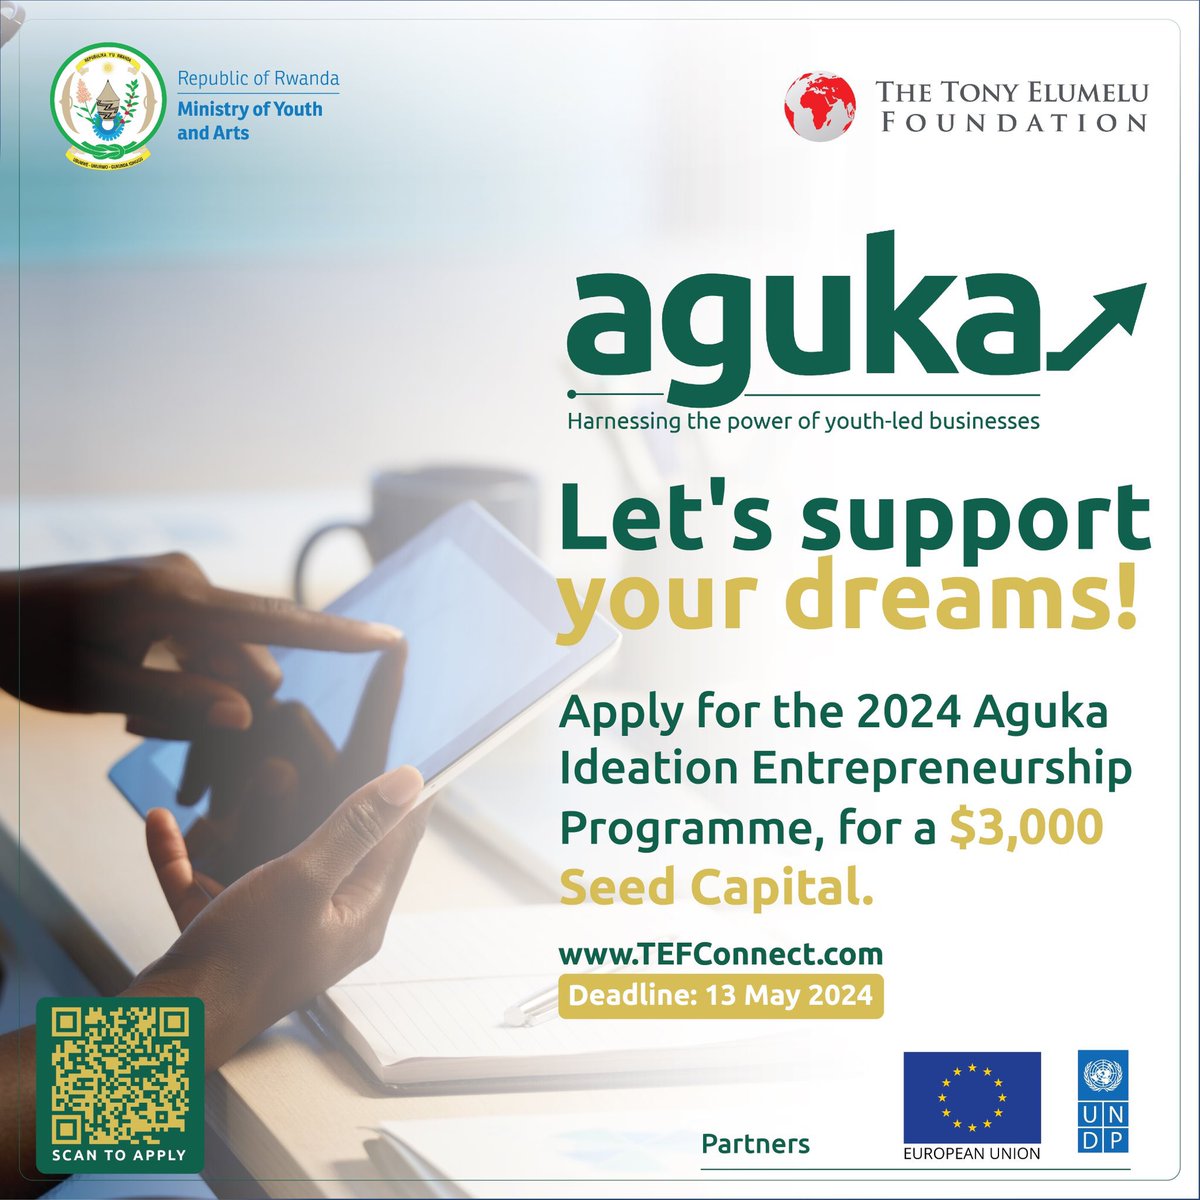 📌Calling all aspiring Rwandan entrepreneurs aged 18-30! Here's your chance to fuel your dreams with the 2024 #Aguka Ideation Entrepreneurship Programme 📈Gain business skills 🎓Receive mentorship 💰Secure seed capital of $3000 Apply at tefconnect.com before 13 May.